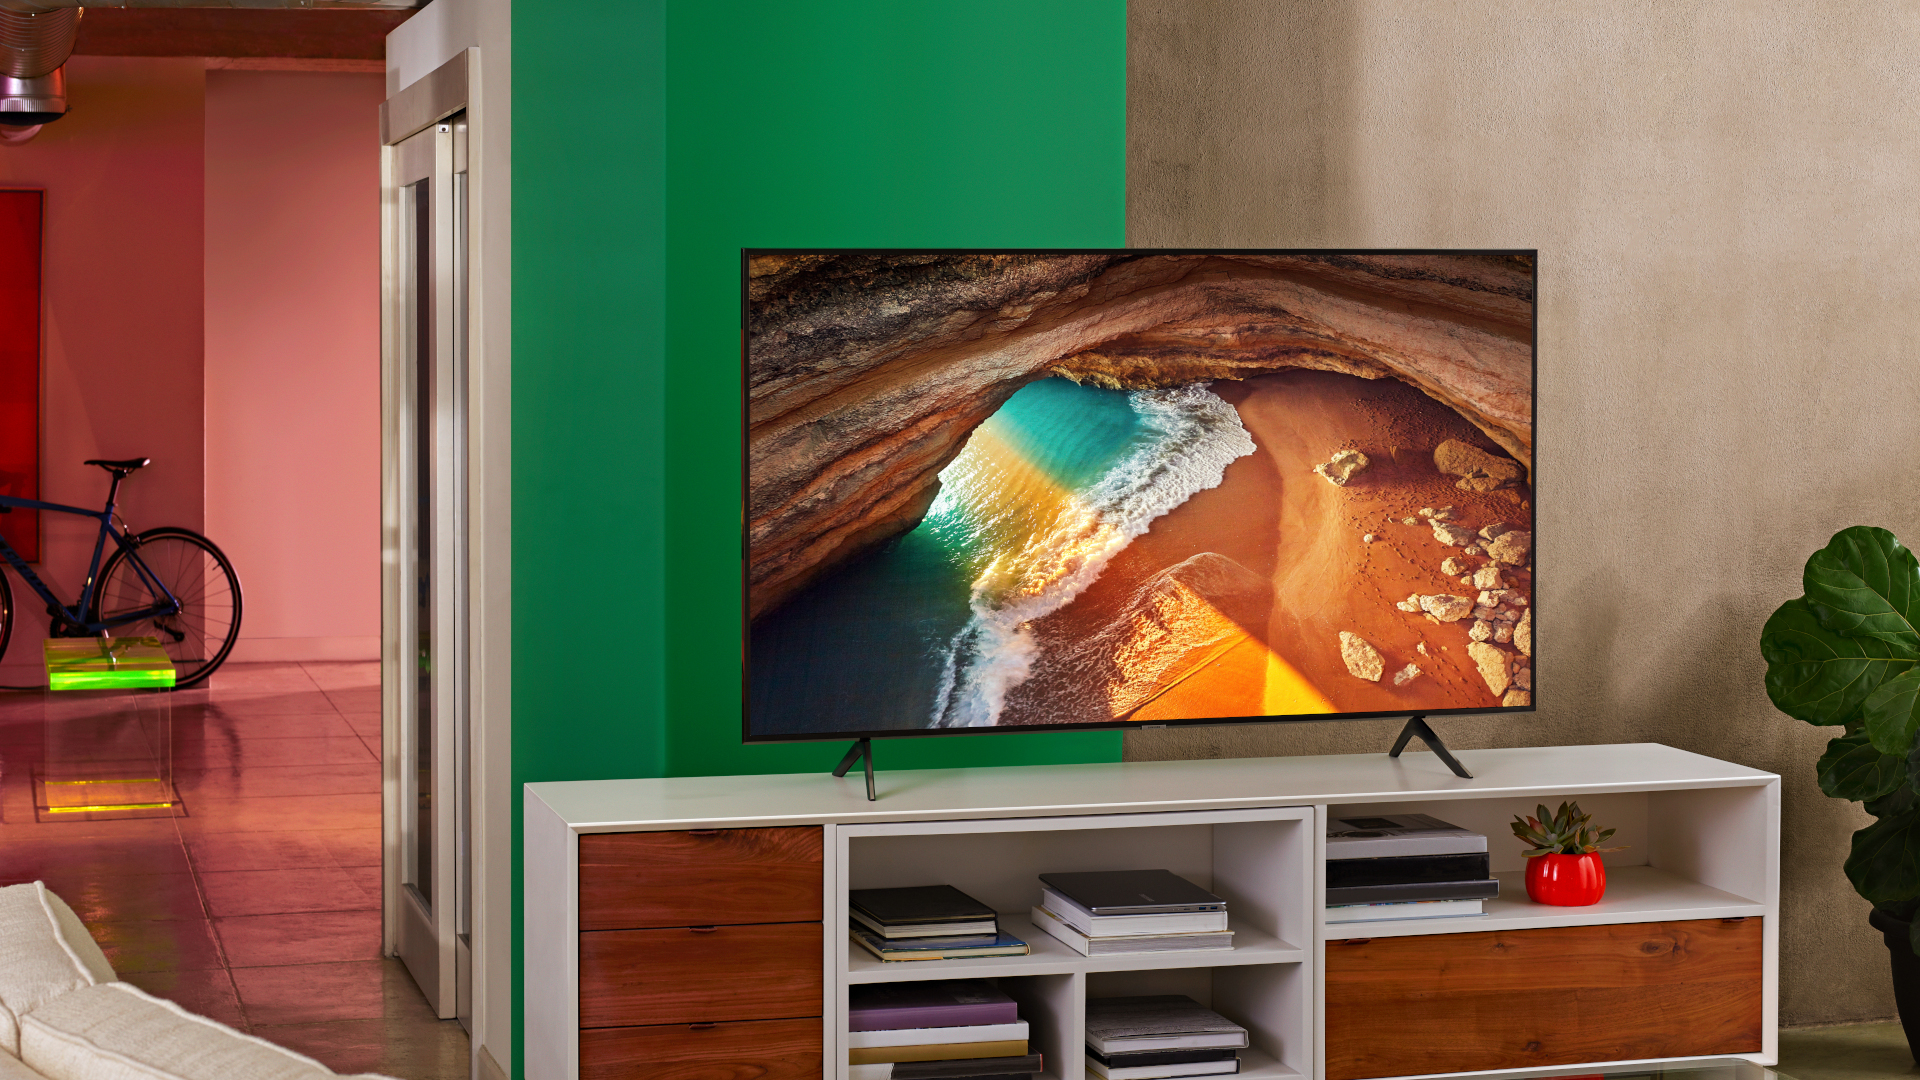 Samsung TV Catalog 2019: Every new Samsung TV coming in 2019 7